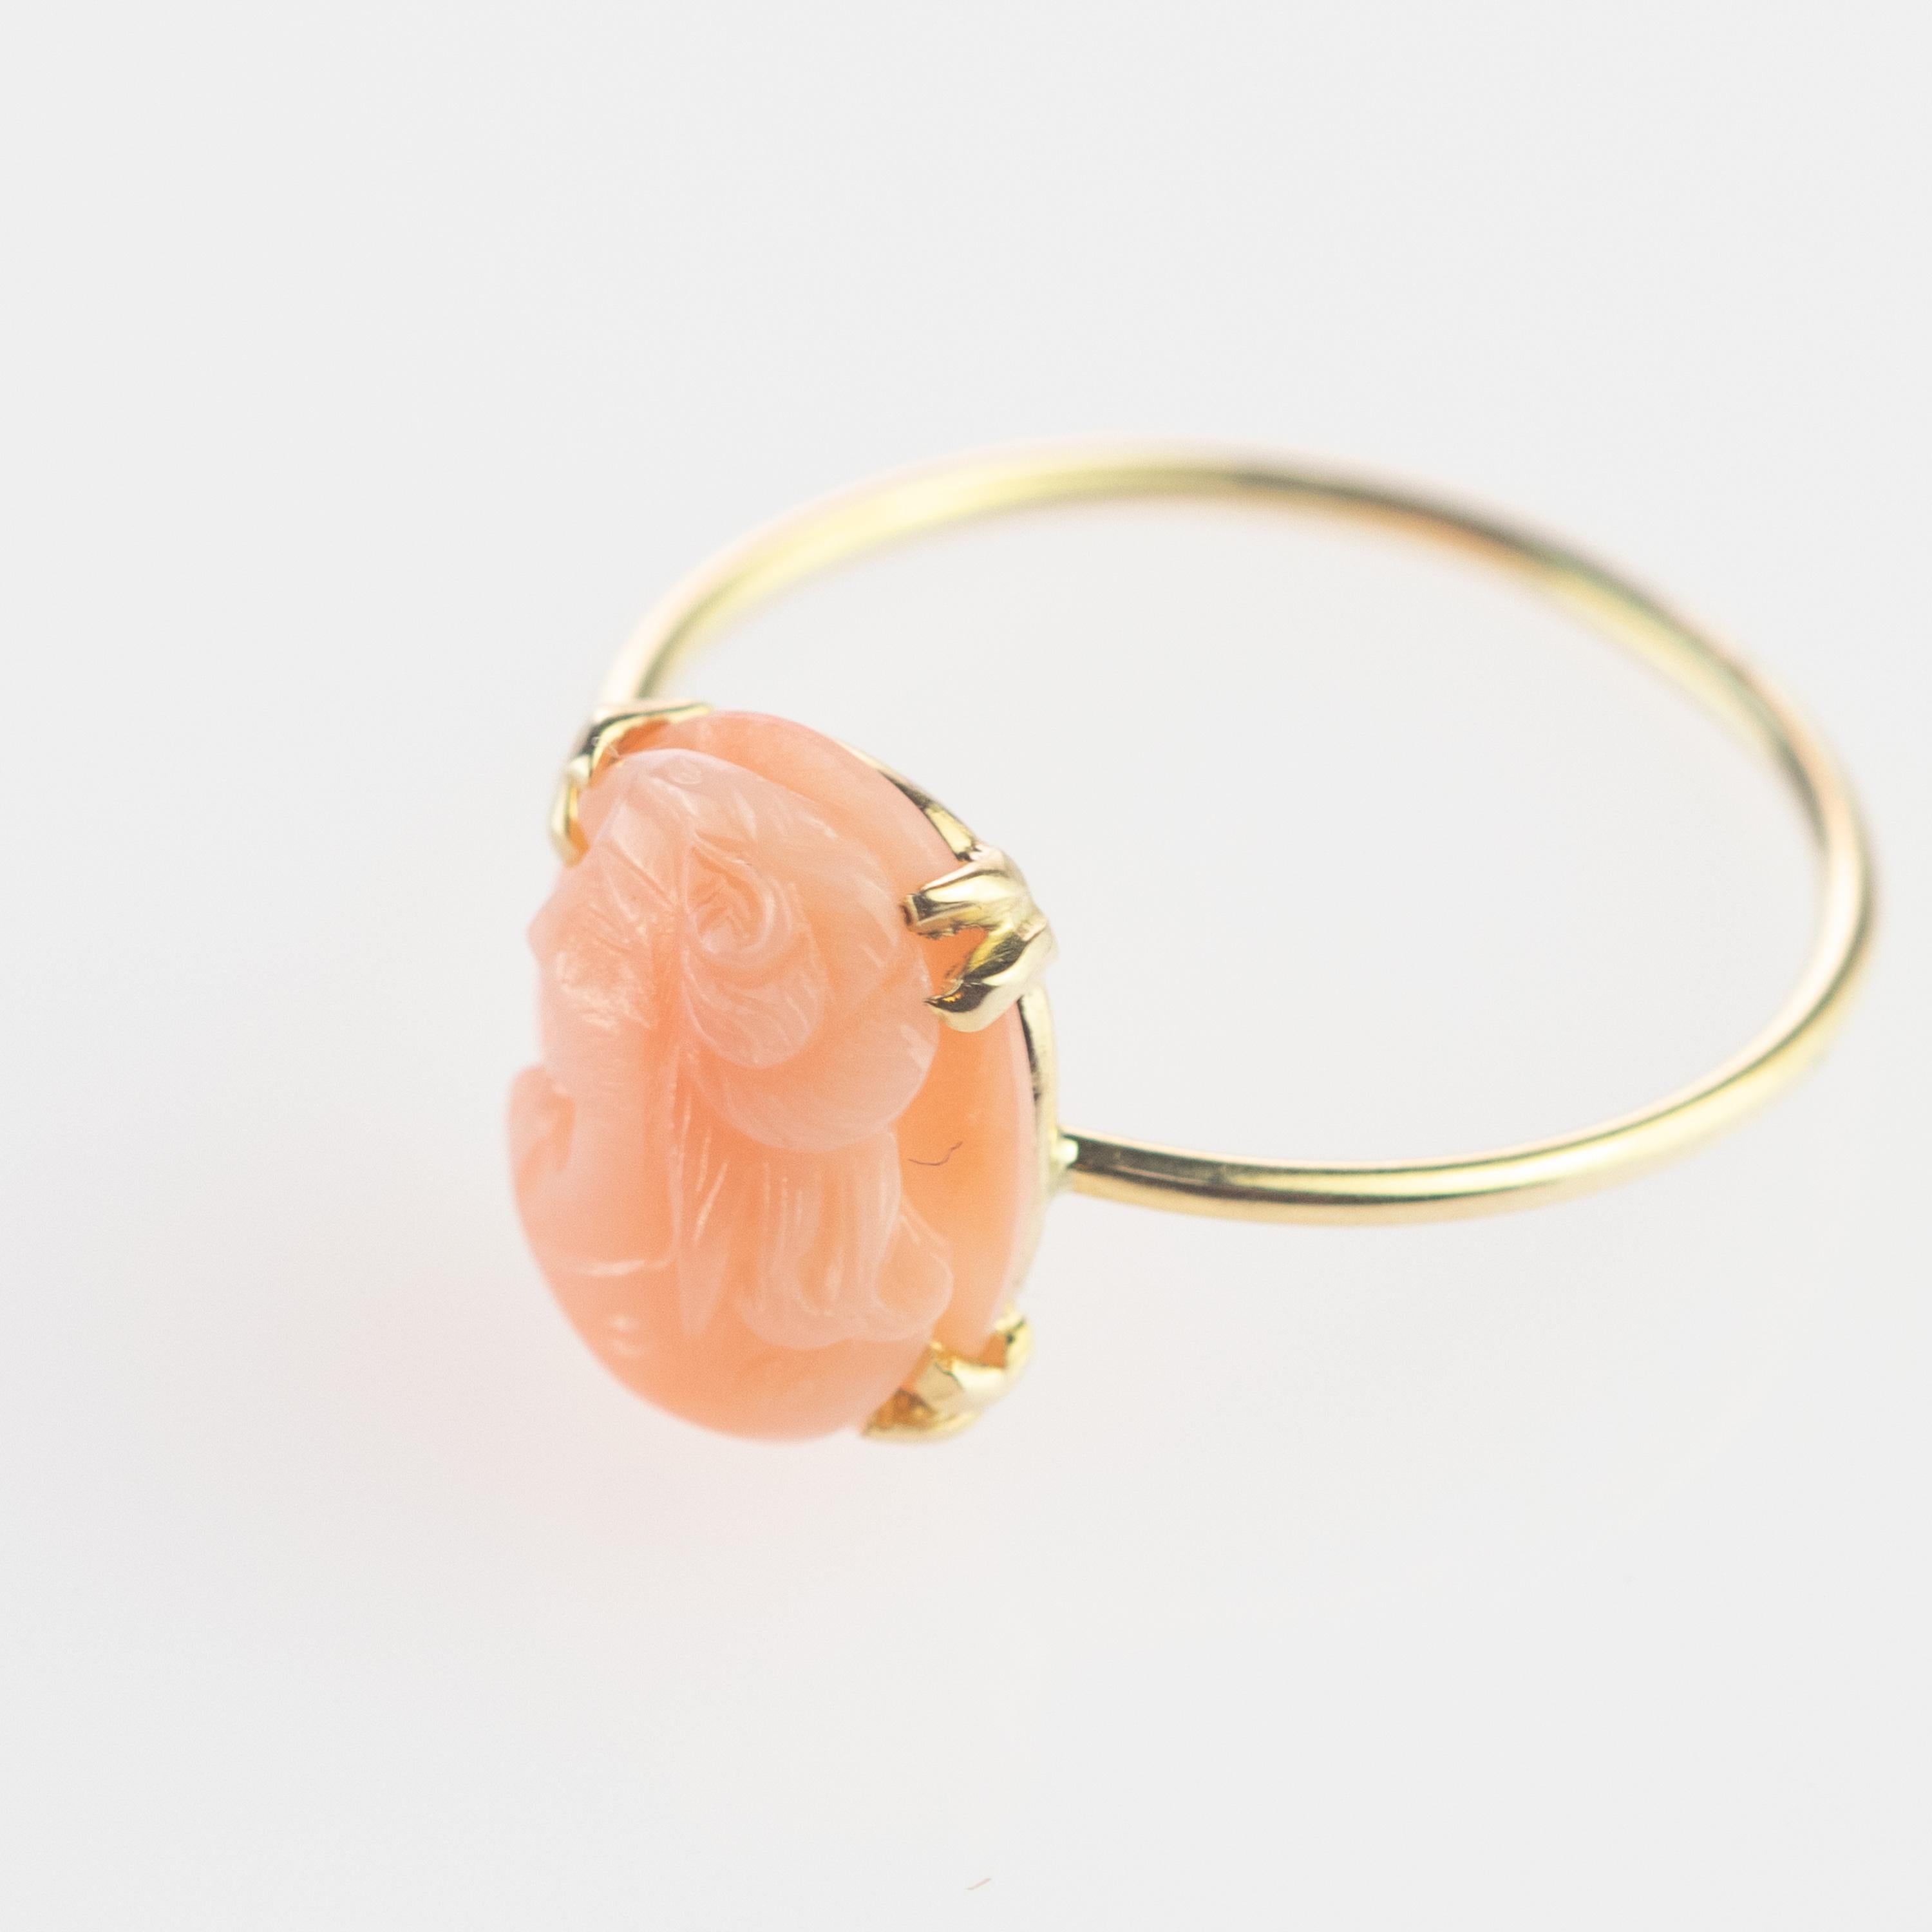 Intini Jewels 2.5 Carat Pink Cameo Coral 9 Karat Gold Oval Handmade Chic Ring In New Condition For Sale In Milano, IT